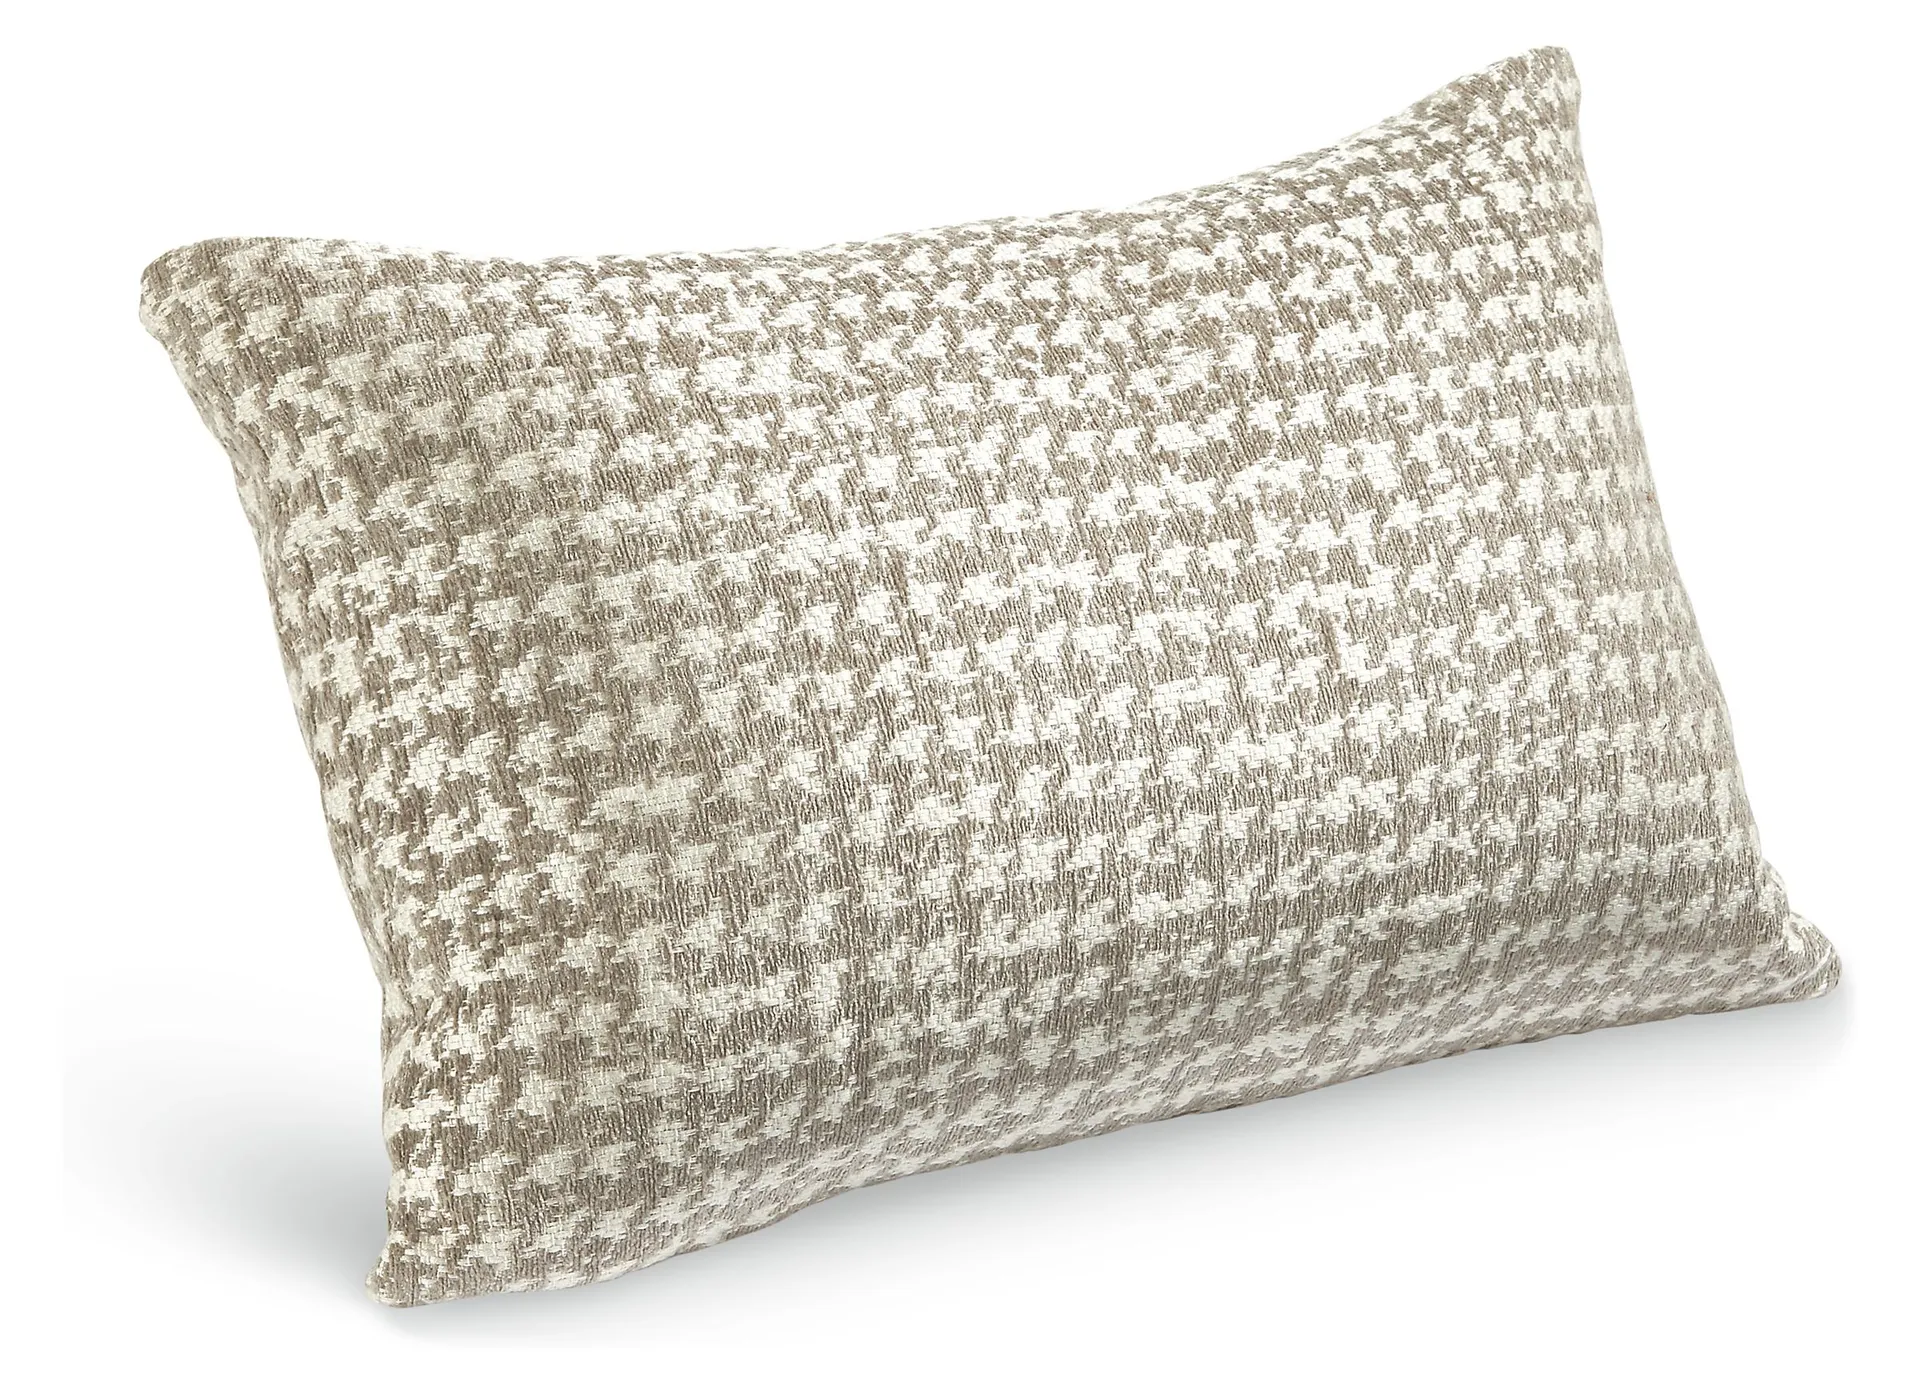 Barnes 20w 13h Throw Pillow Cover in Grey/White